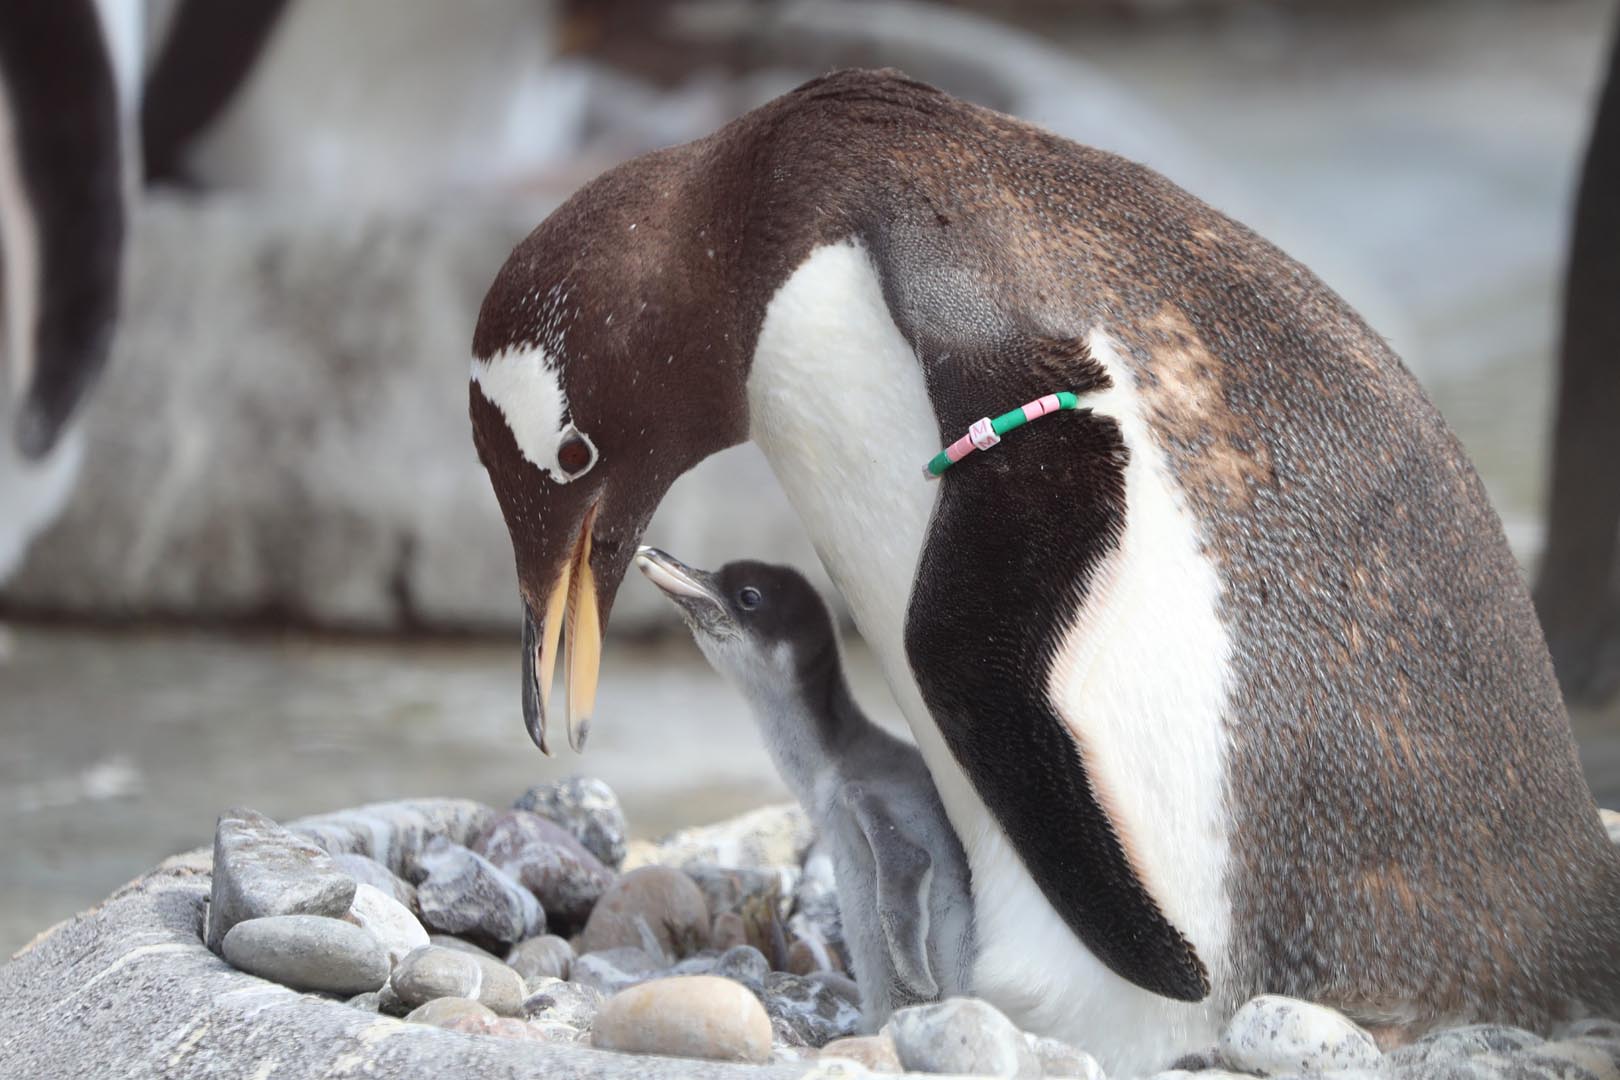 Gentoo penguin Muffin and chick on nest IMAGE: Amy Middleton 2022